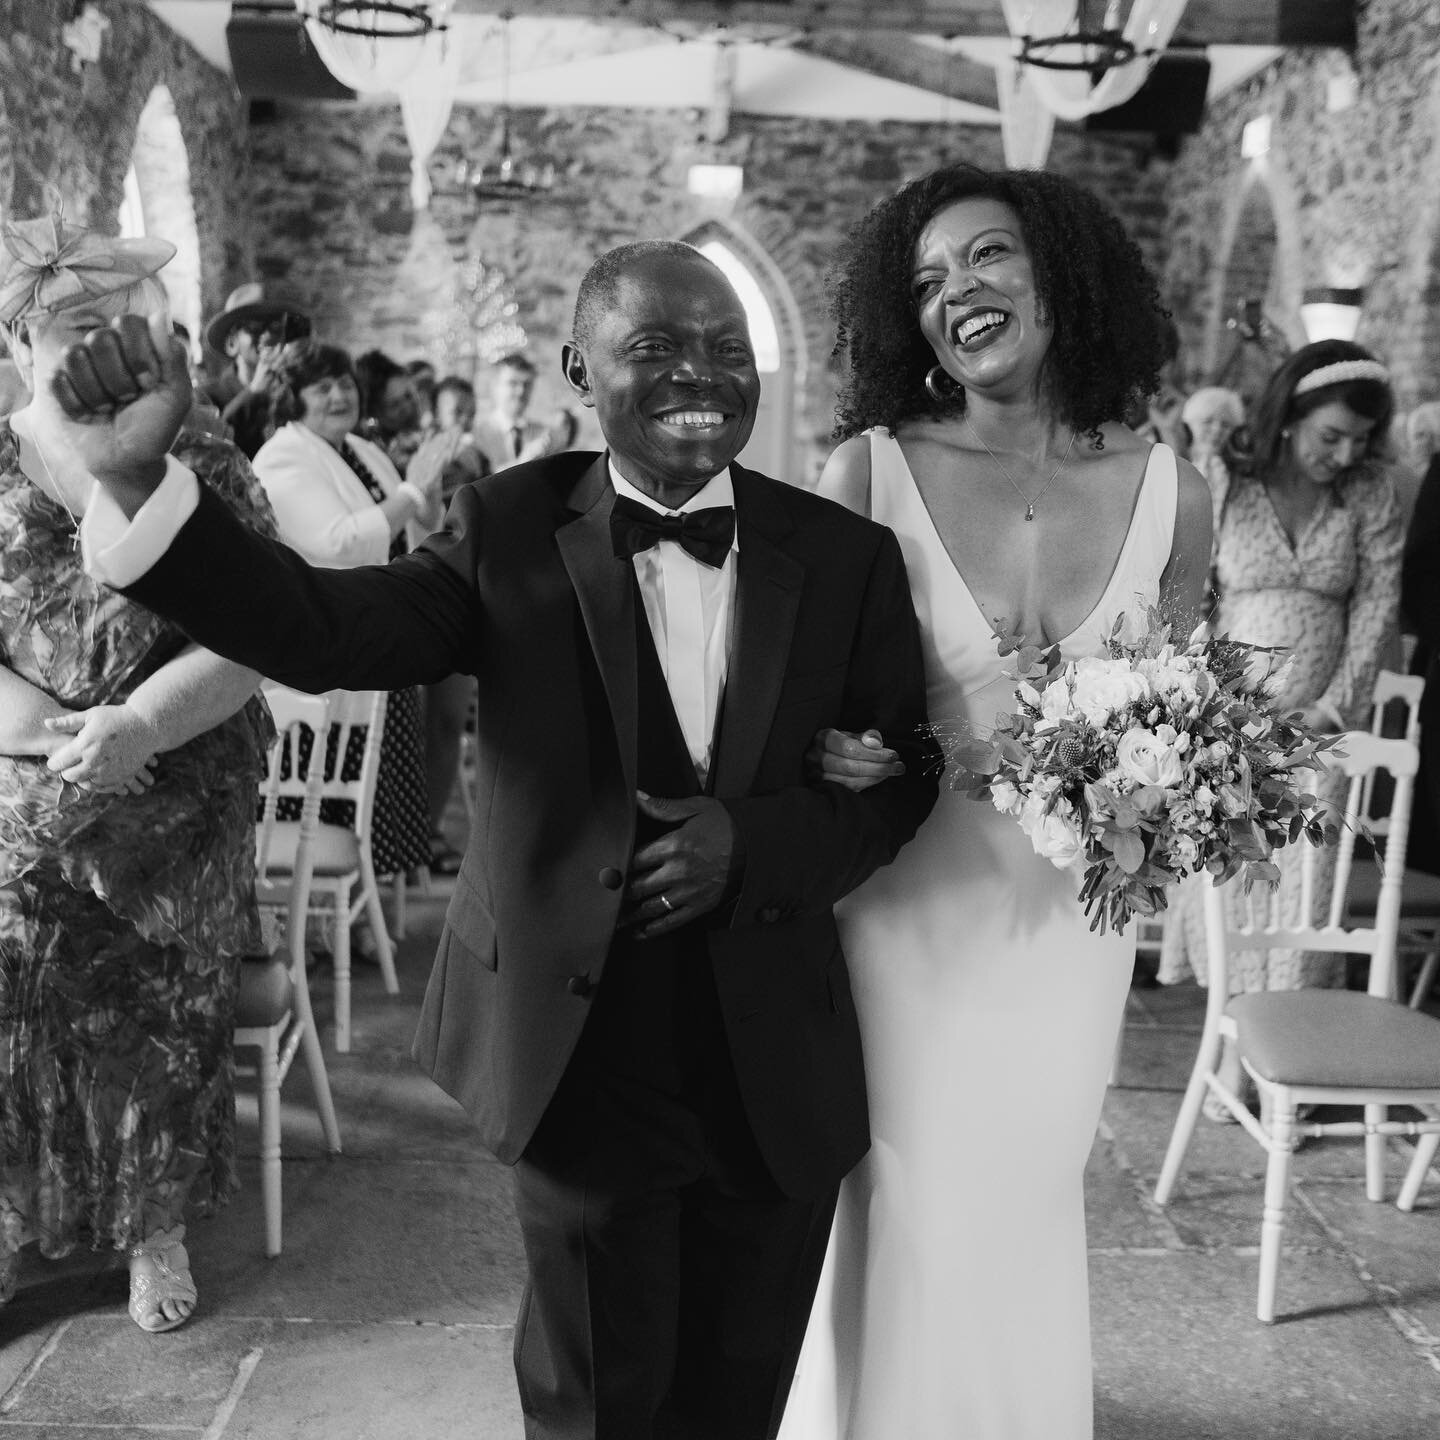 The Irish Wedding Part.3 - The ceremony 

The only word I can use to describe our wedding ceremony is JOYFUL! 

We had the most amazing gospel choir sing for us and when I was walking down the aisle, it was just so magical. 

Seeing all our loved one